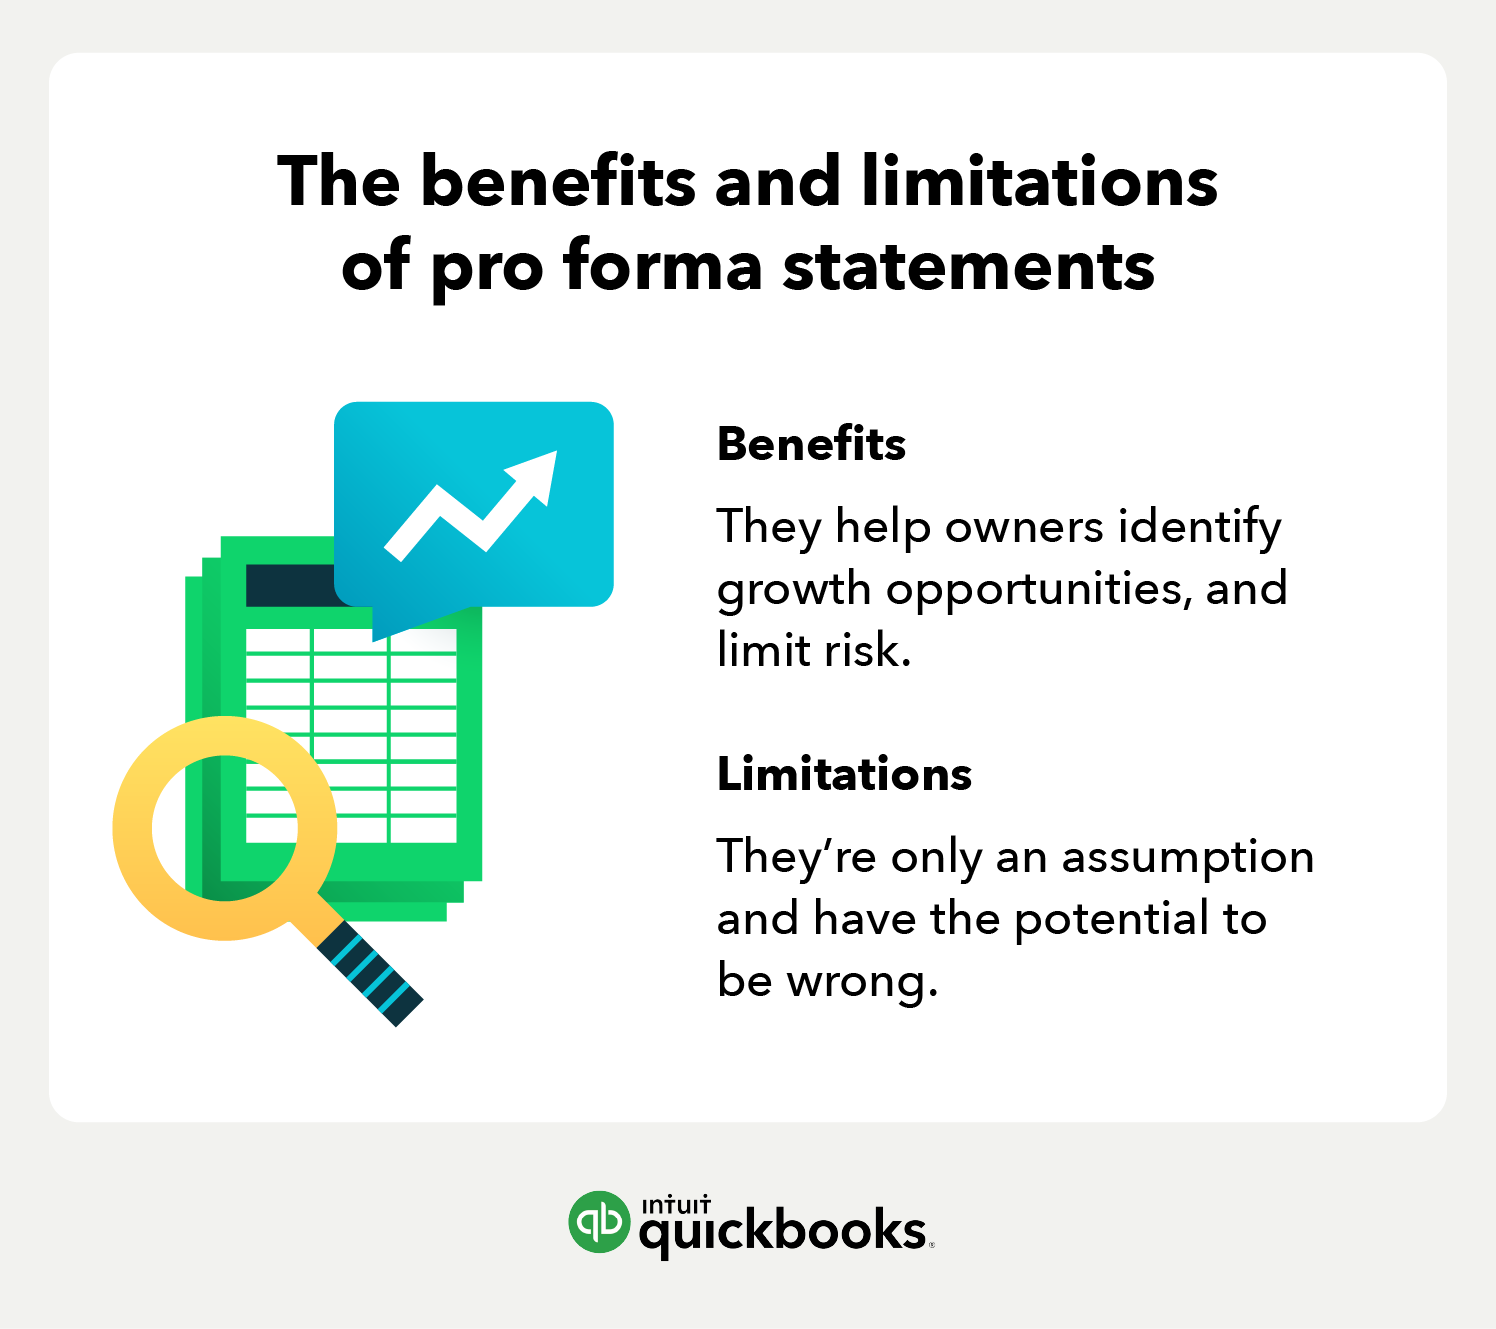 The benefits and limitations of pro forma statements. Benefits: They help owners identify growth opportunities and limit risk Limitations: They're only an assumption and have the potential to be wrong